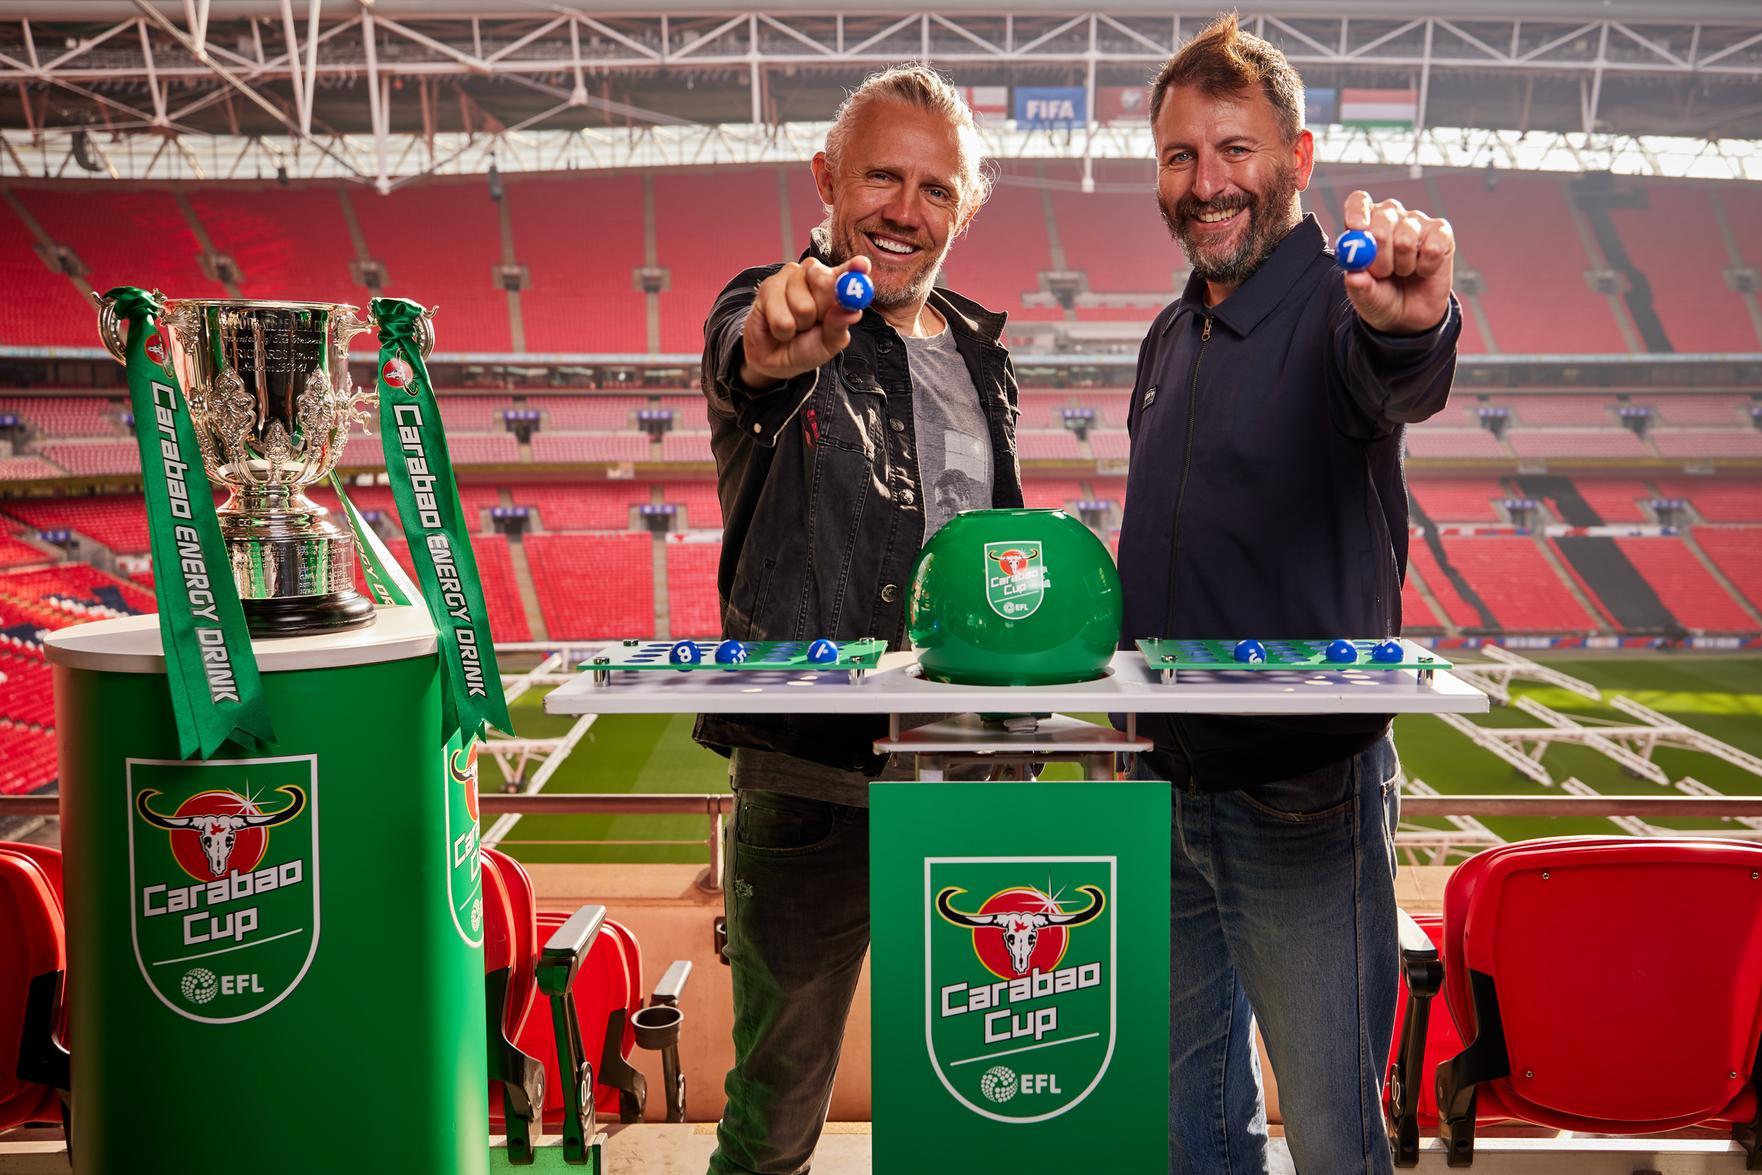 When is the Carabao Cup quarter final draw? TV channel and how to watch